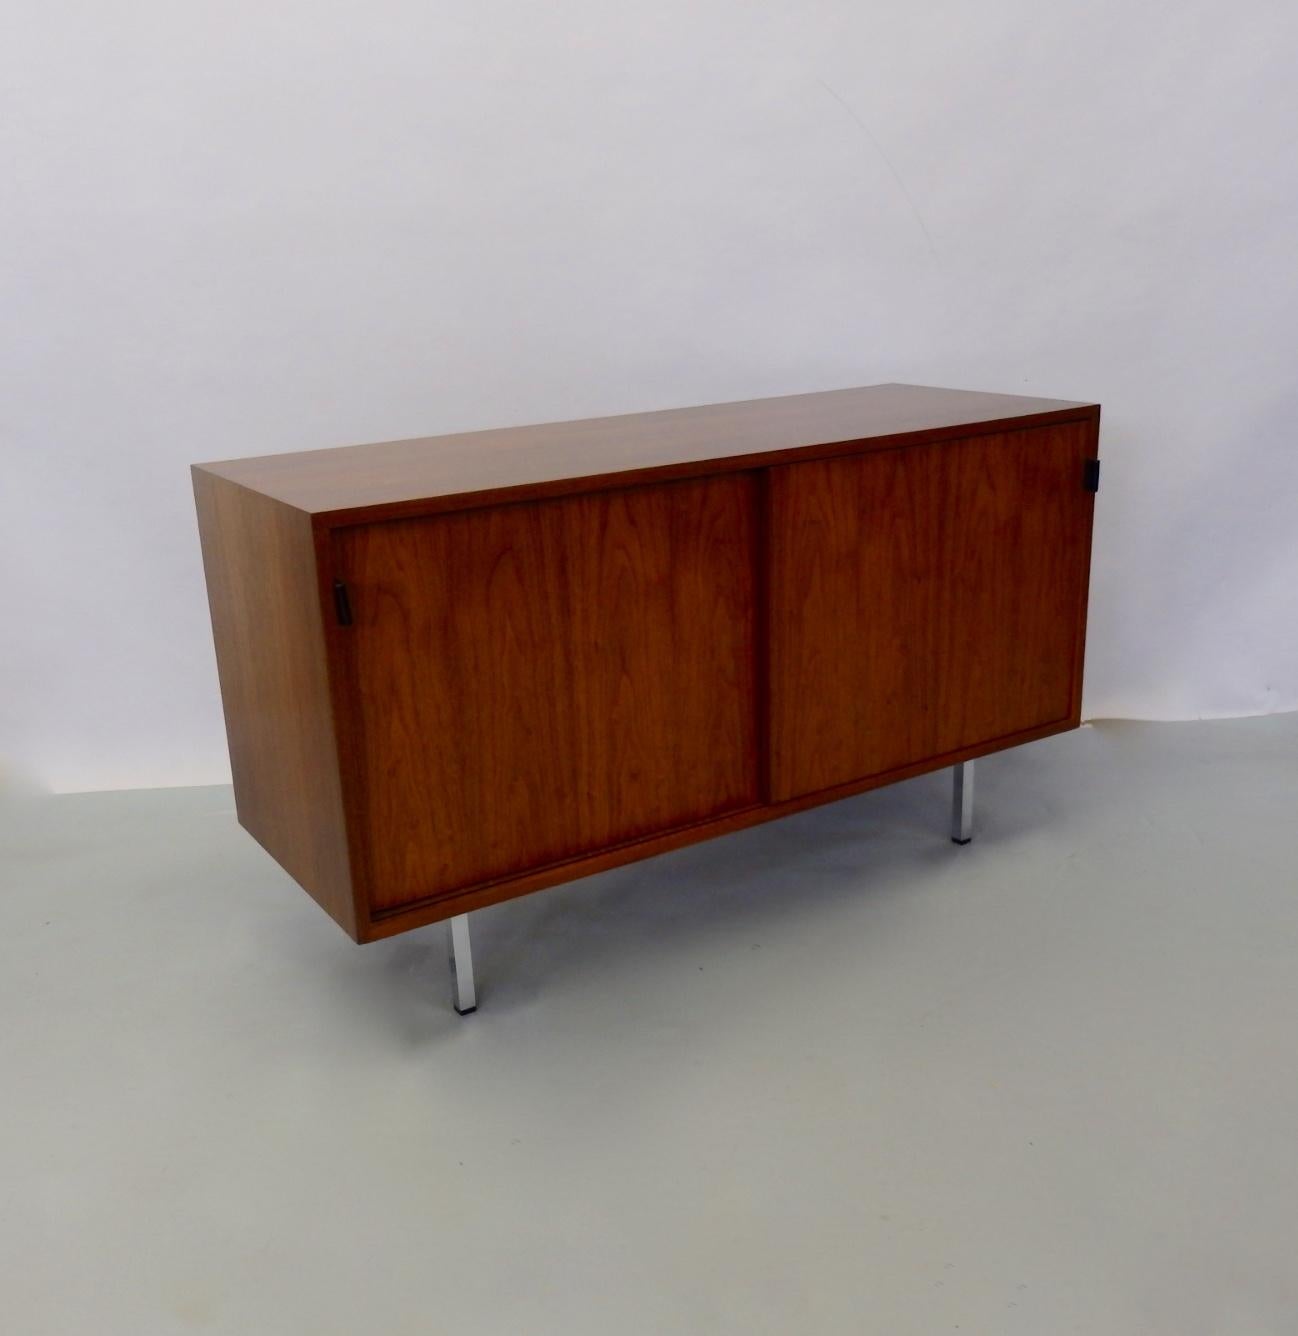 Nice walnut cabinet with file drawer on one side four drawers on the other. All behind sliding doors with leather pulls. Cabinet recently refinished. Pulls in excellent condition. Knoll label intact.